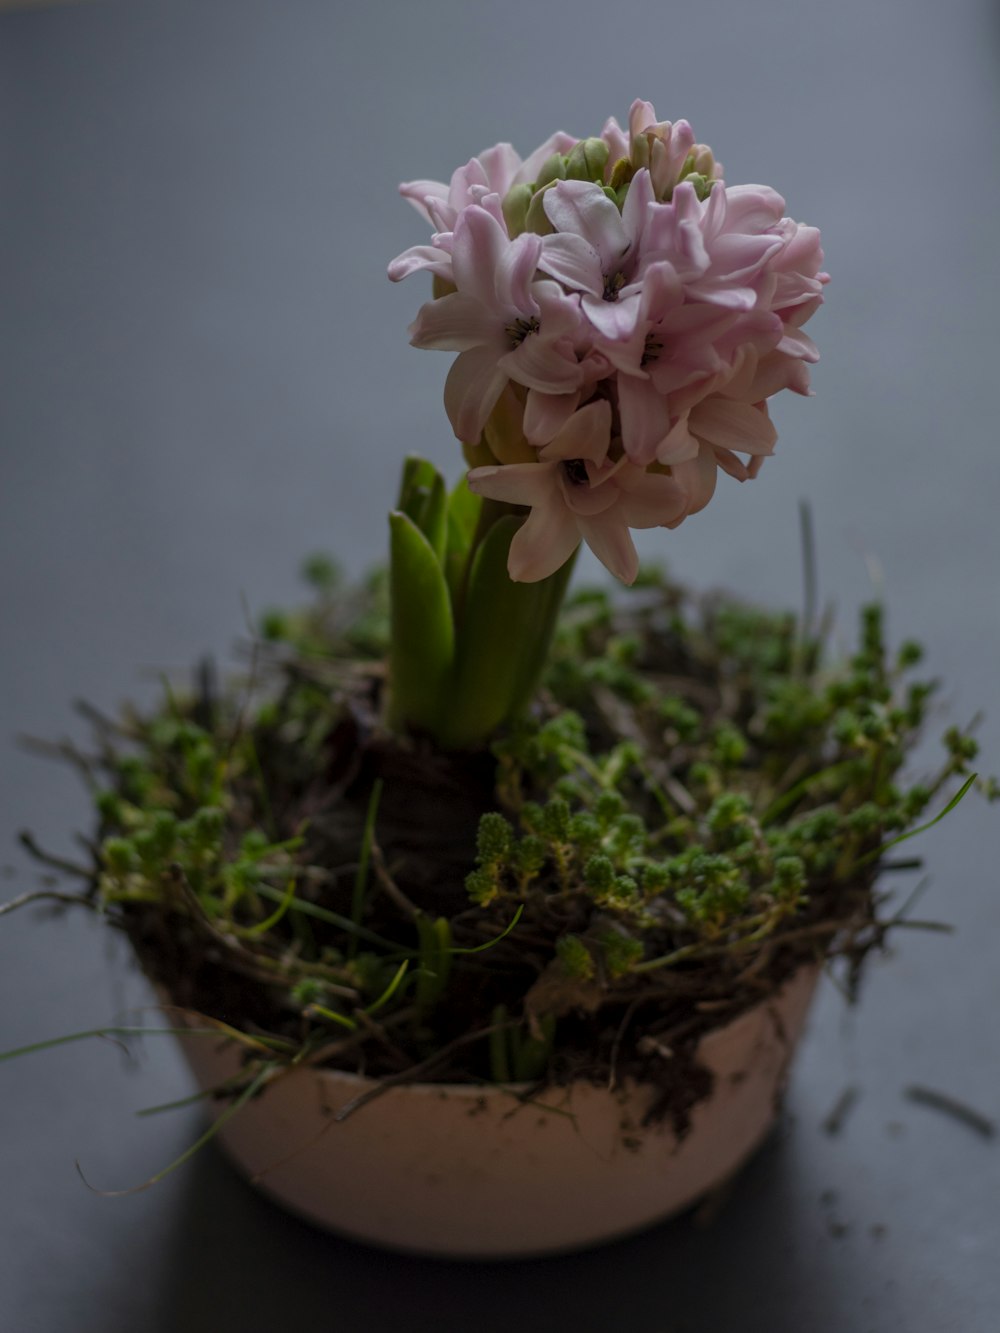 a small potted plant with pink flowers in it